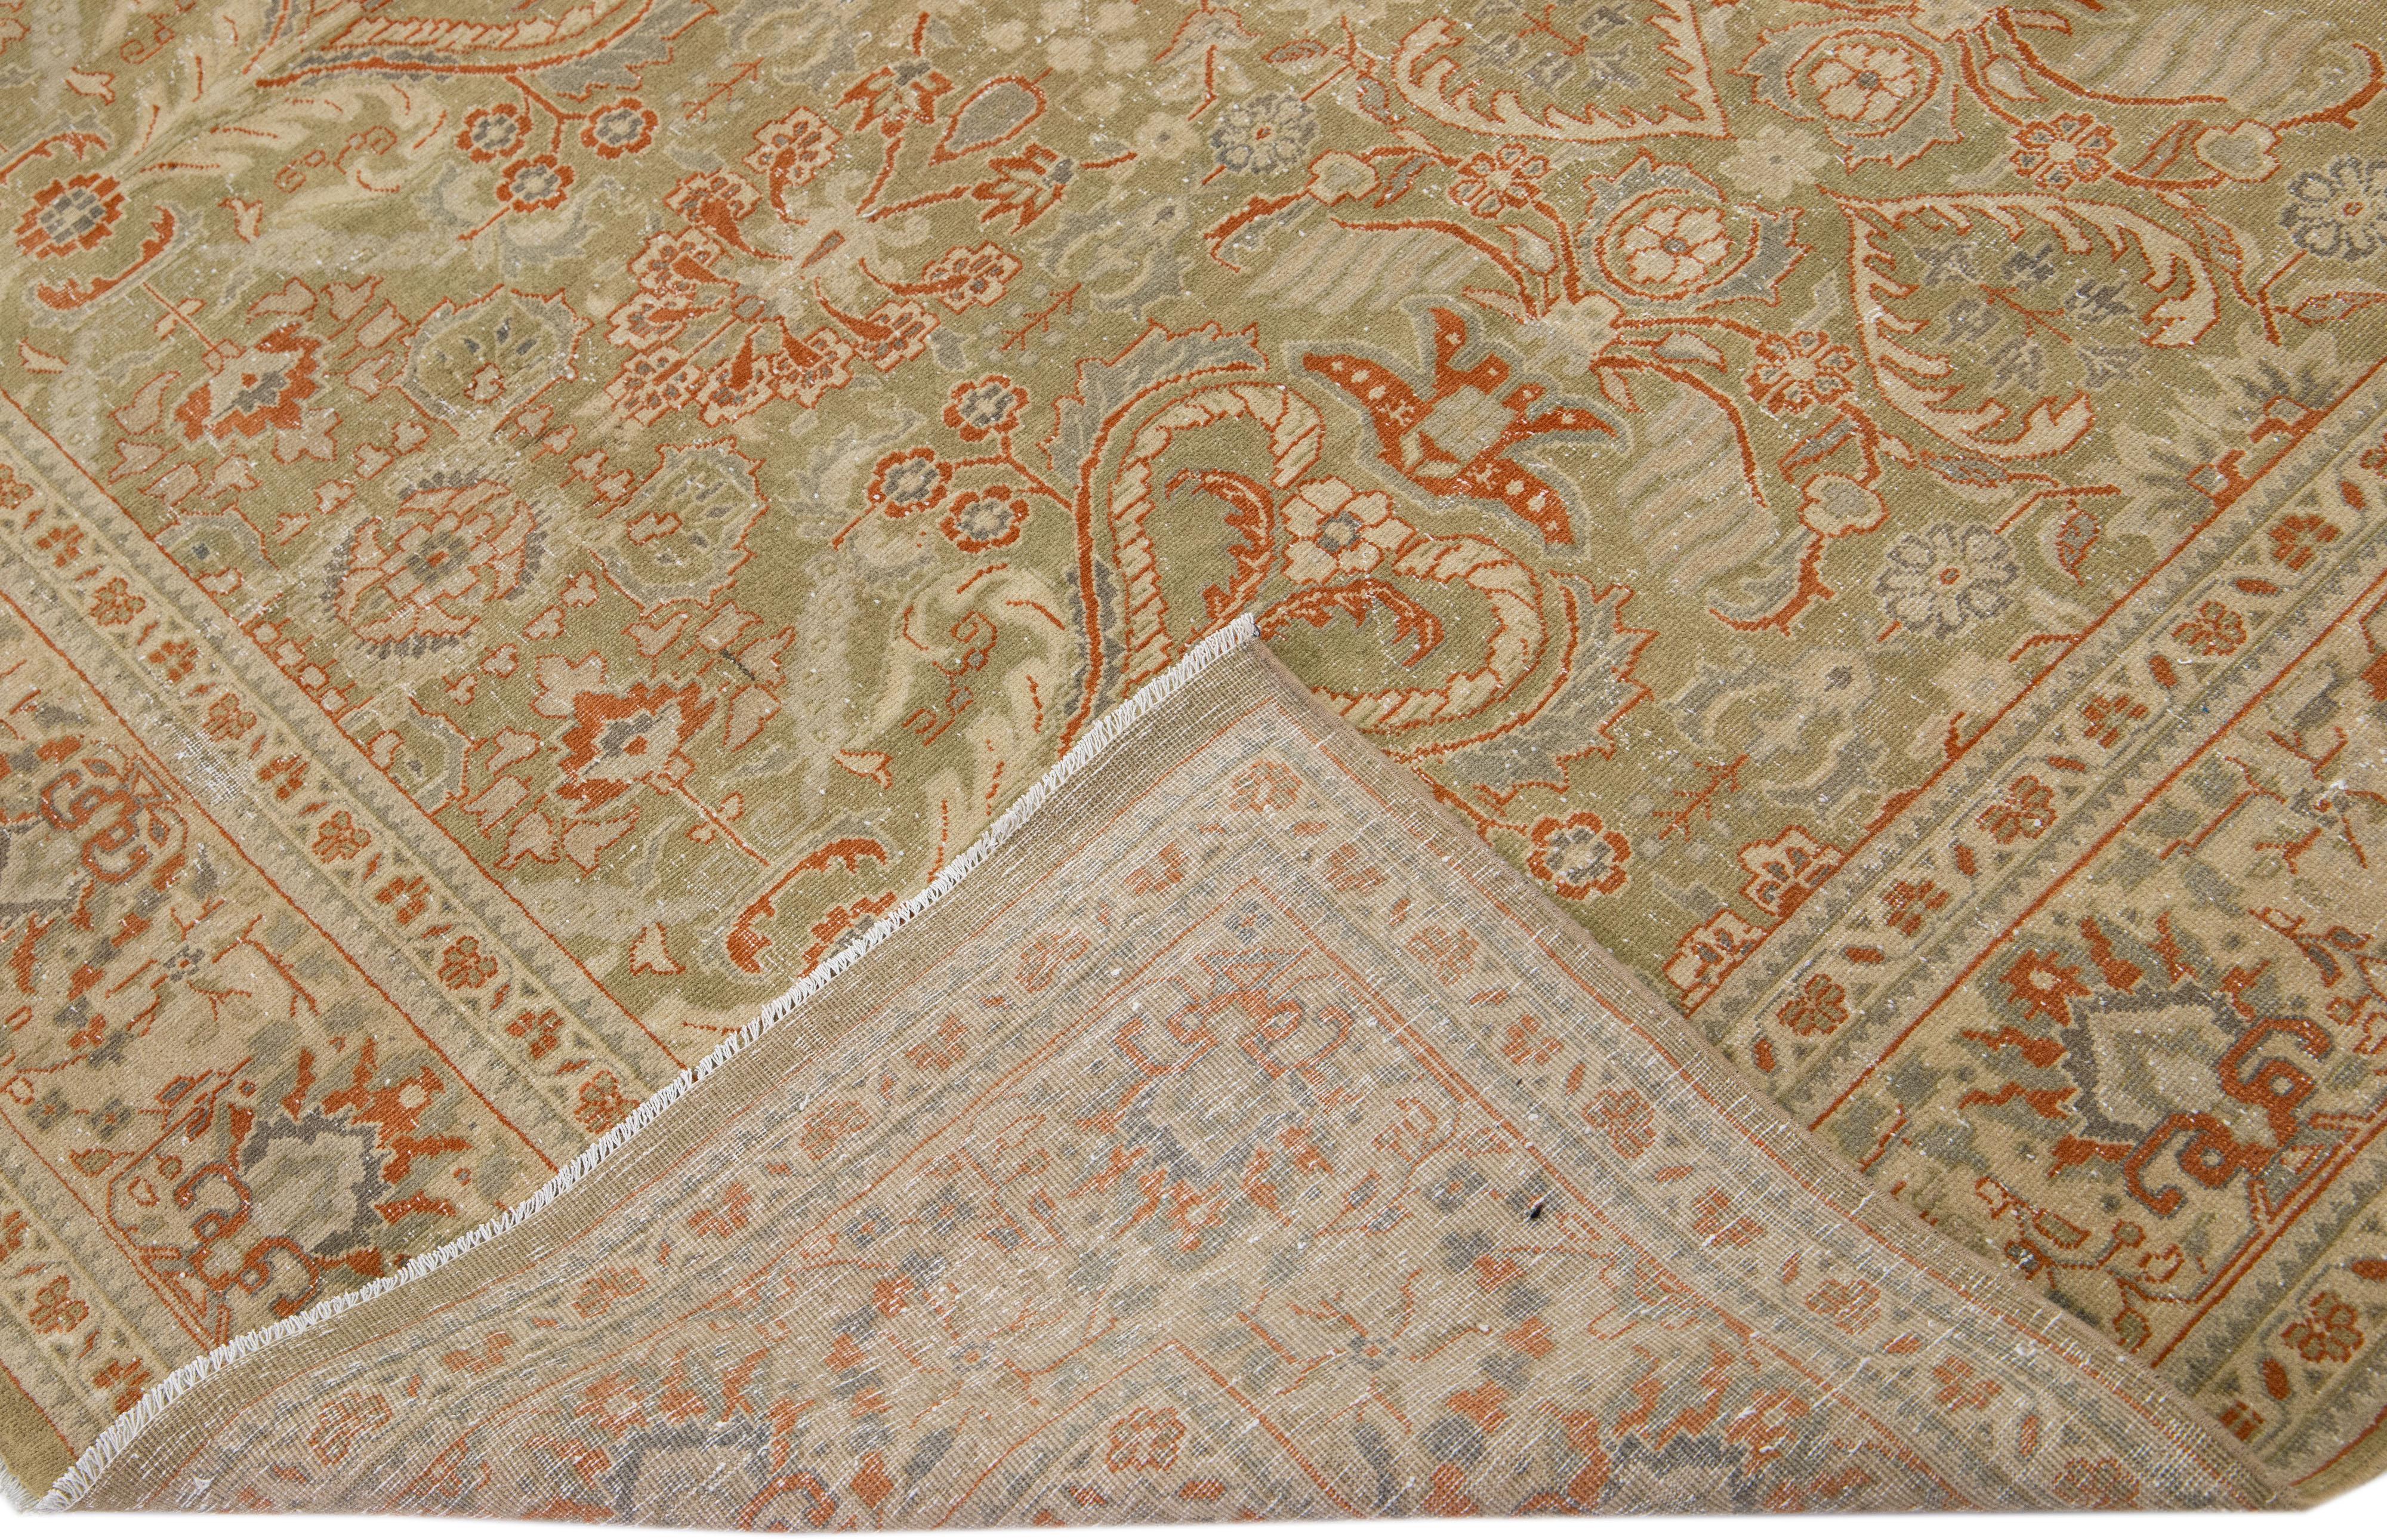 Beautiful Antique Mahal hand-knotted wool rug with a green color field. This Persian rug has orange, beige, and gray accents in an all-over floral design.

This rug measures 7' x 7'.